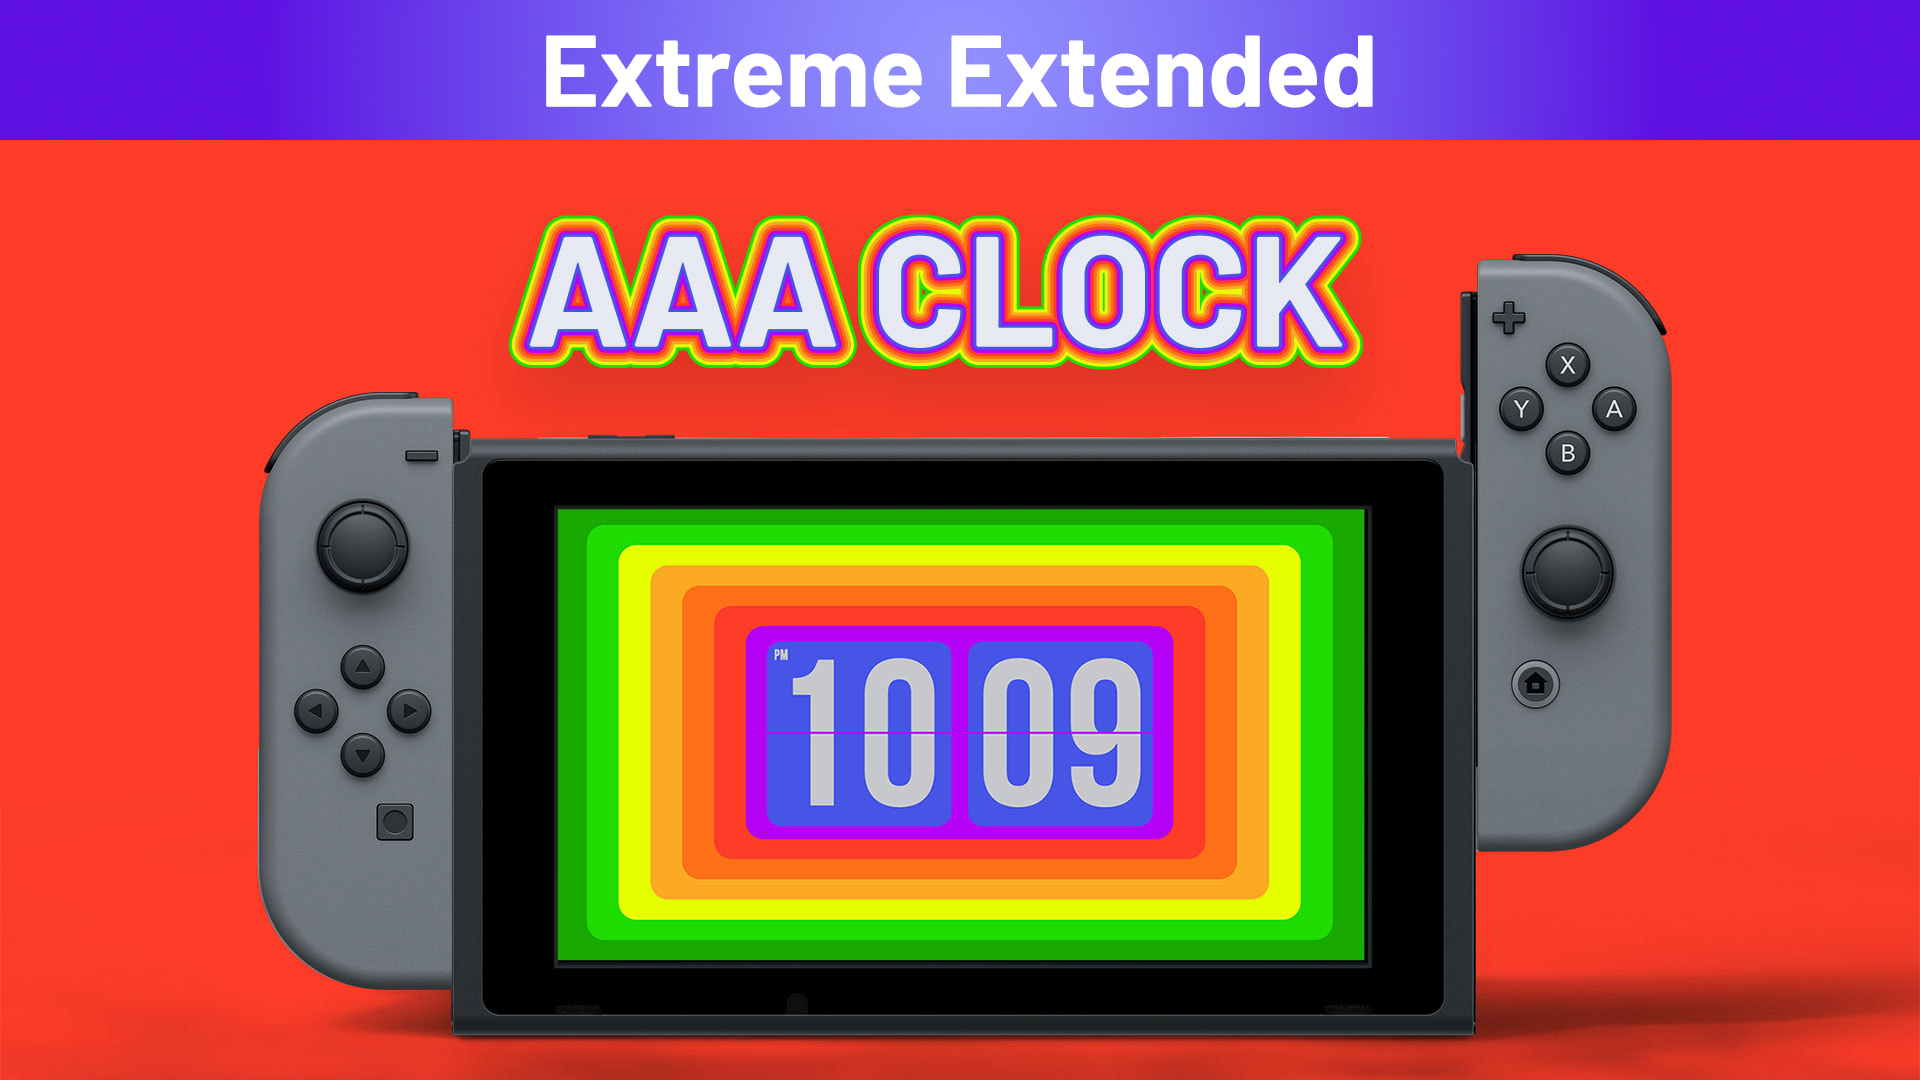 AAA Clock Extreme Extended